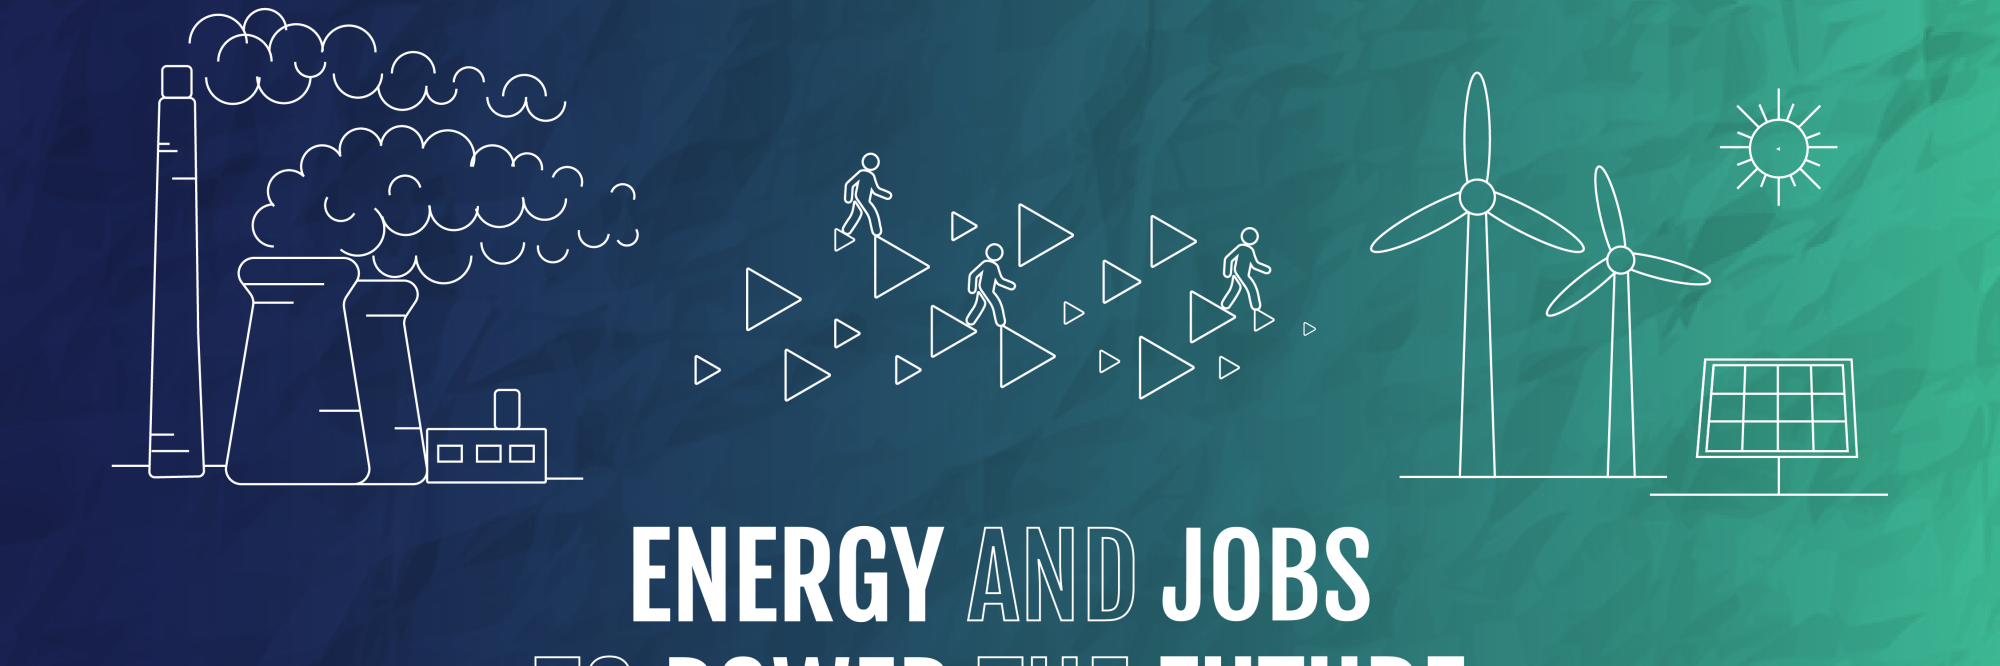 Just Transition Forum 2021: Energy and jobs to power the future